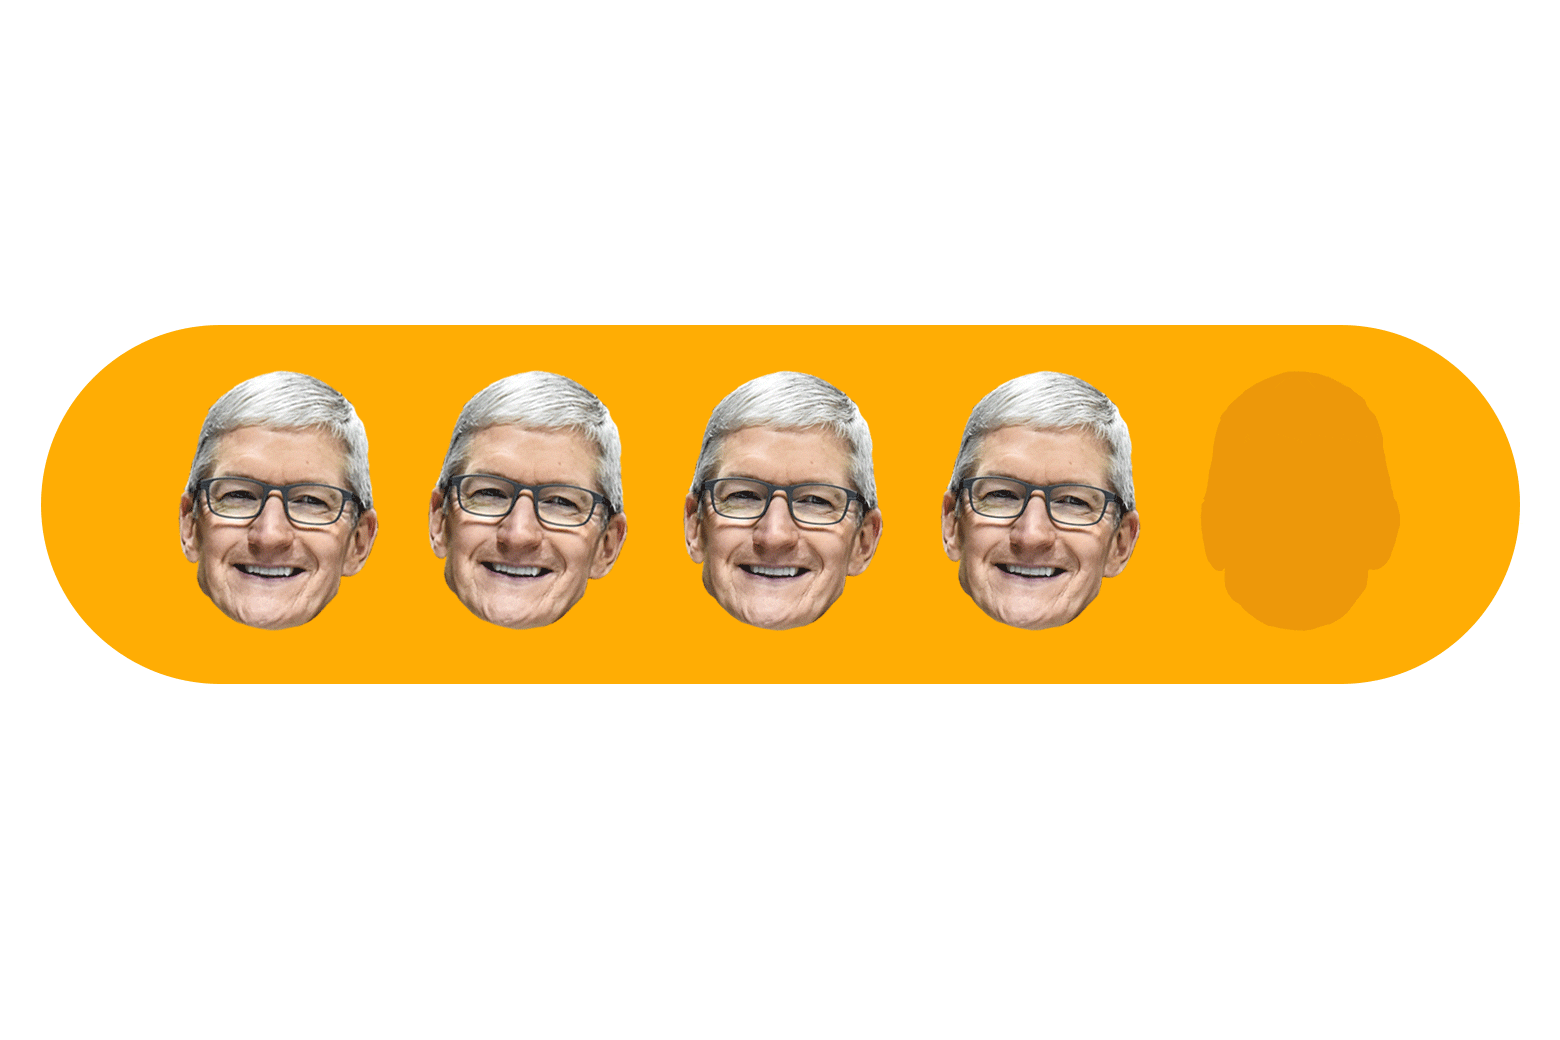 Four Tim Cook heads out of five.